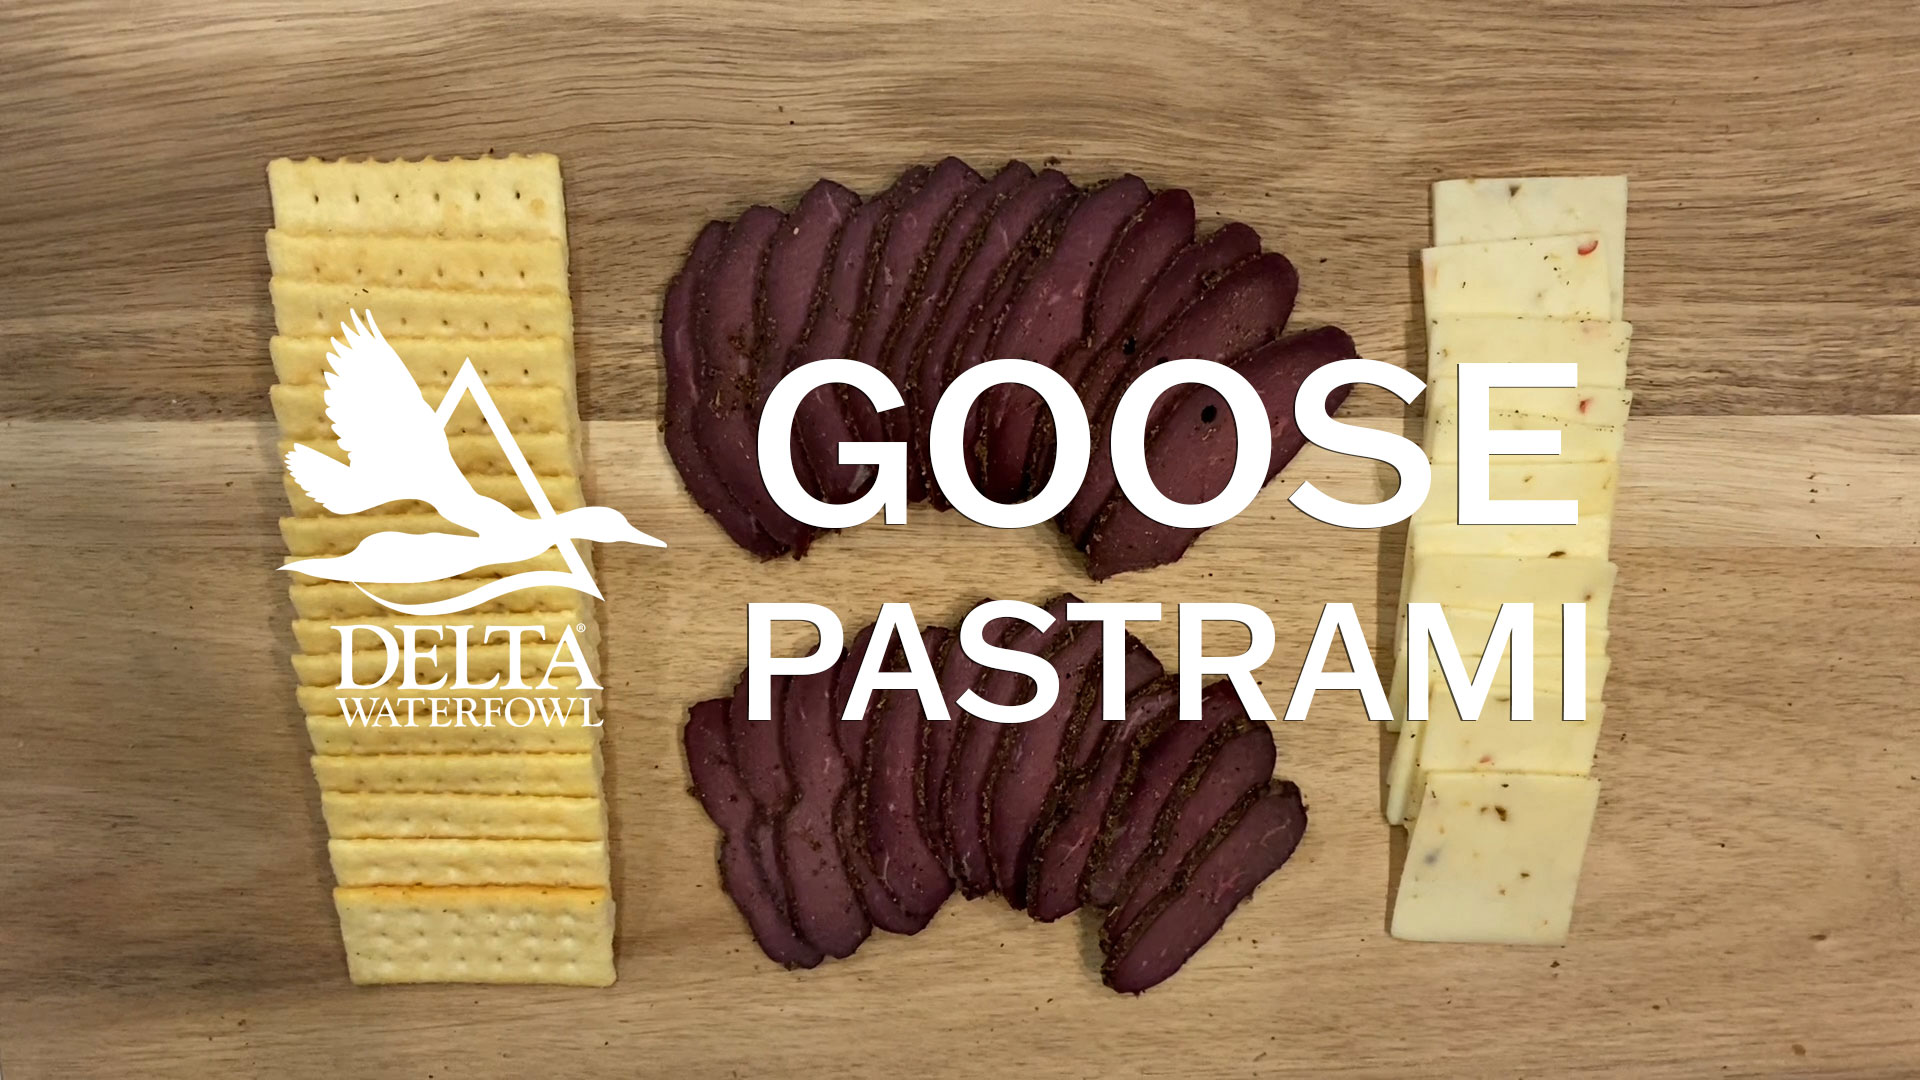 Goose pastrami recipe cooking video with crackers and cheese